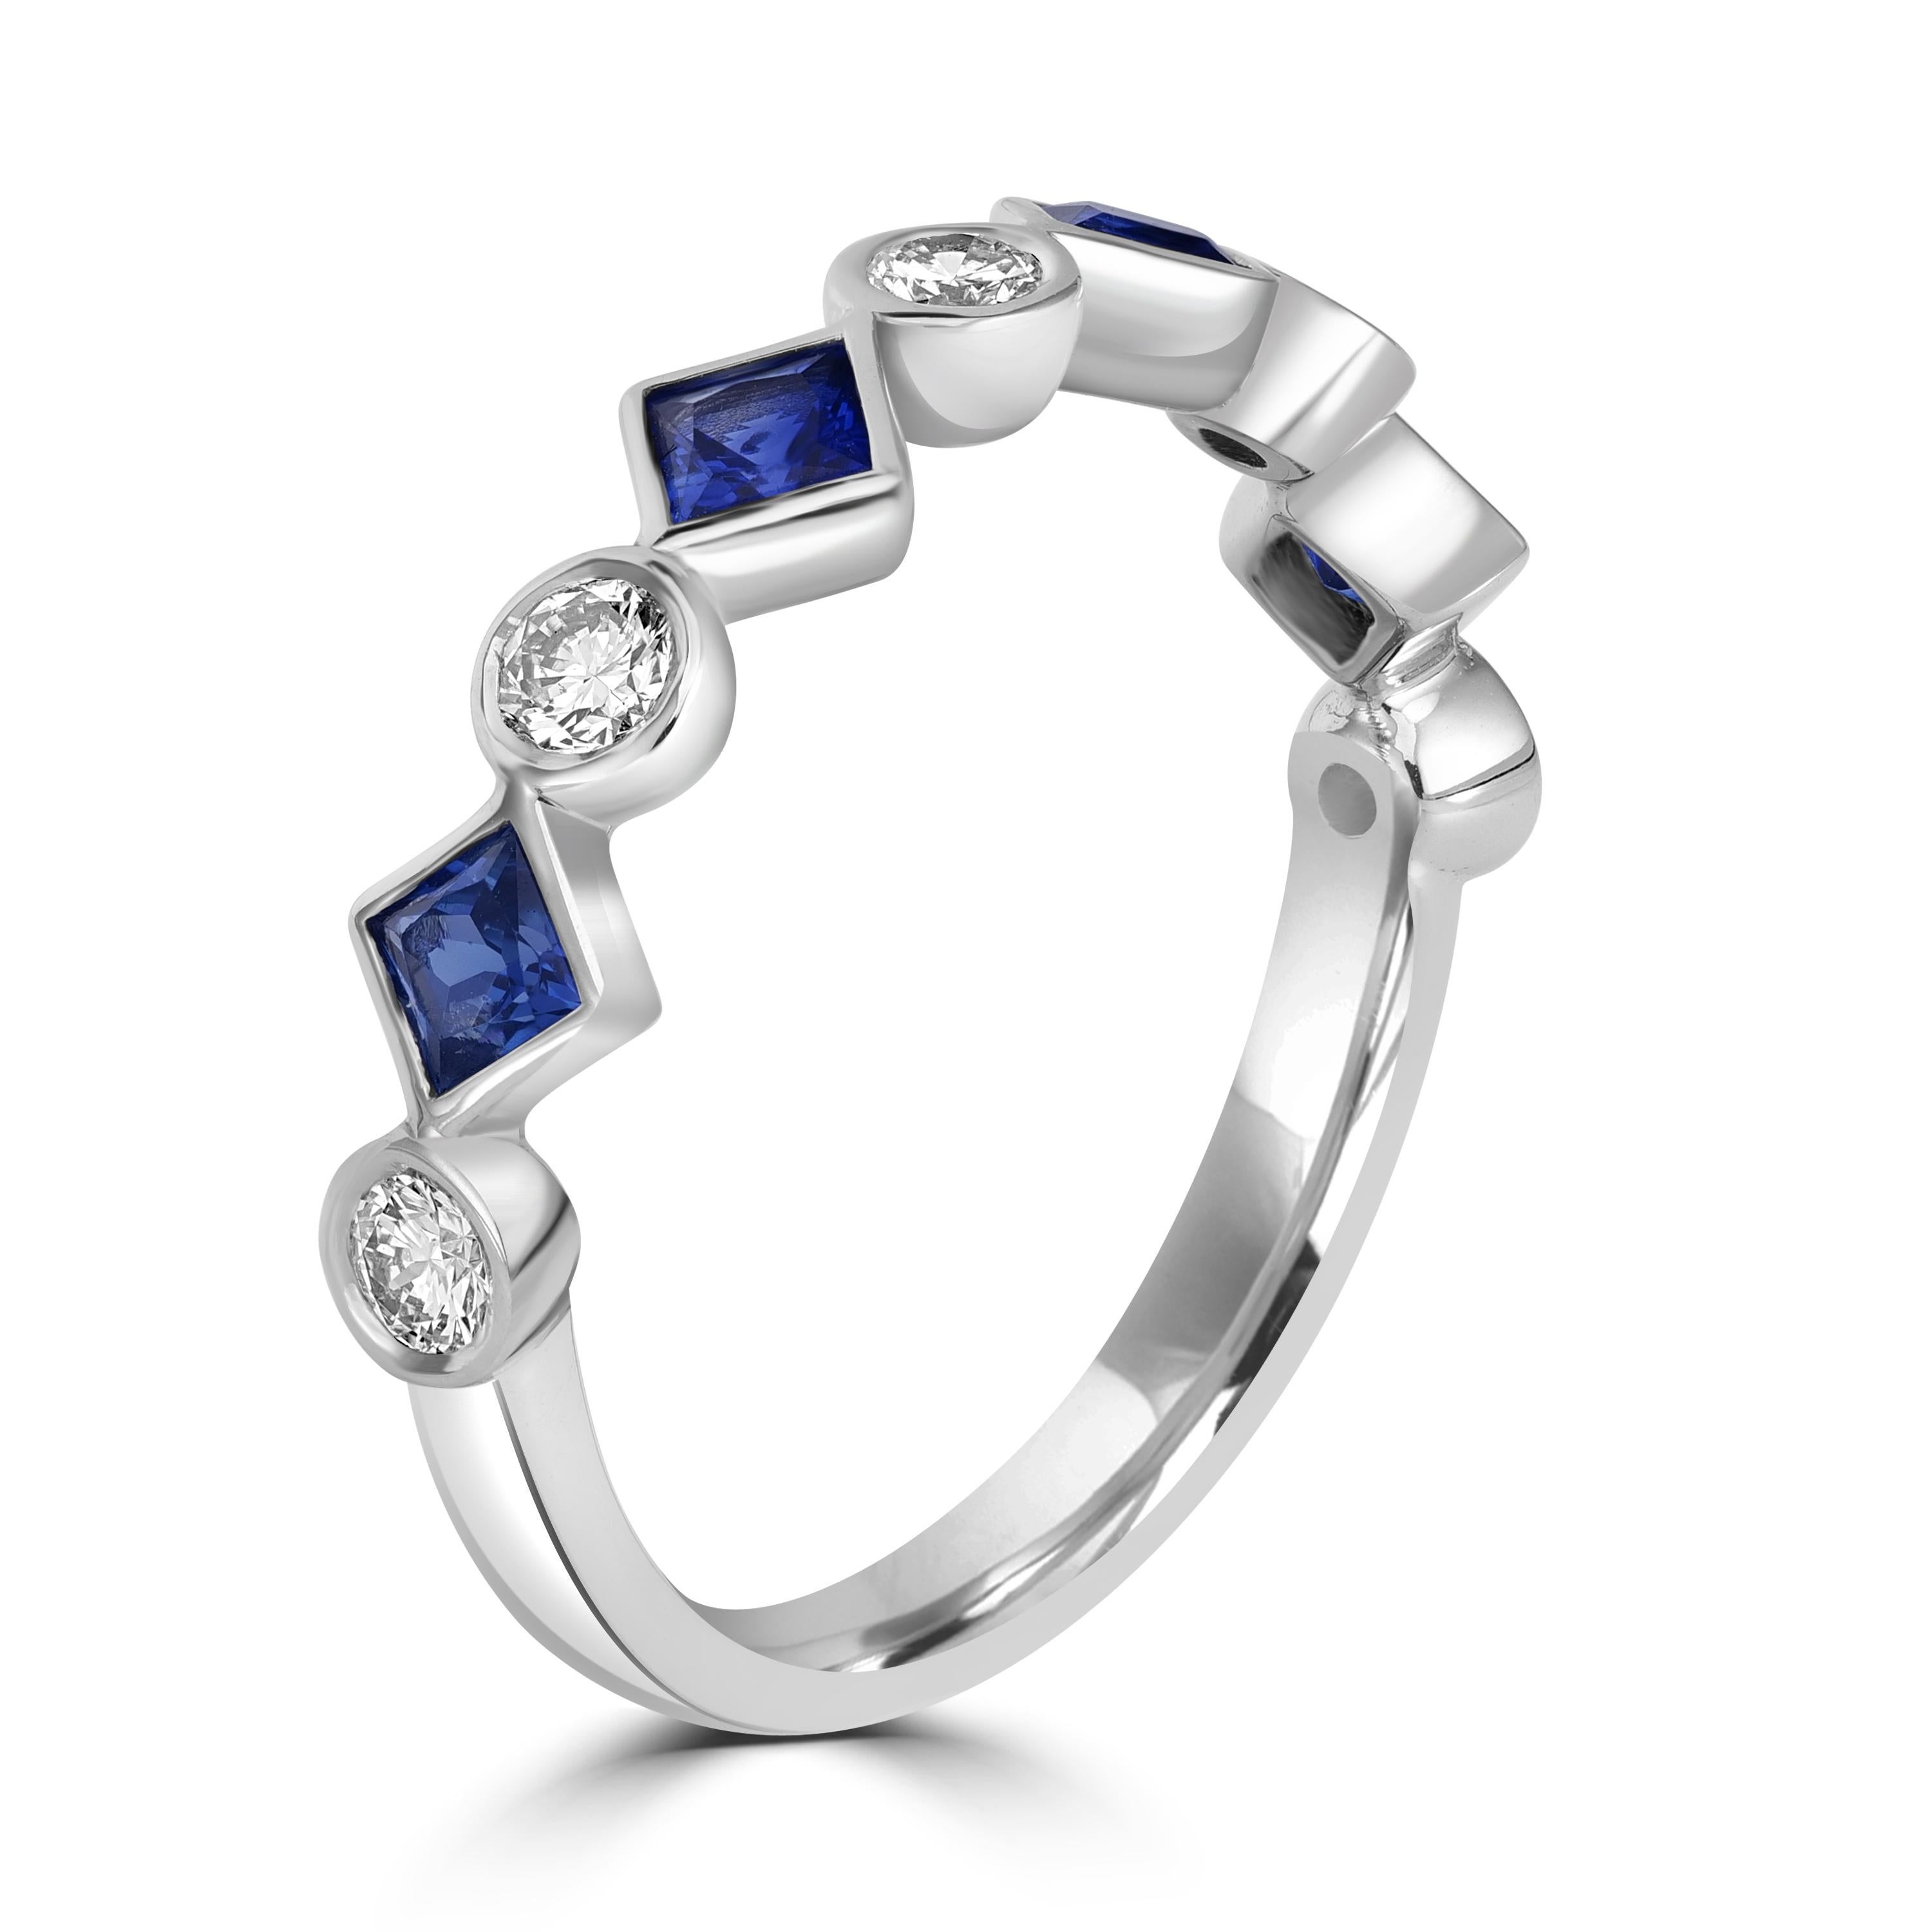 Introducing our enchanting 0.96 Carats Princess Cut Sapphire Half Eternity Bezel Setting Ring Band, embellished with delicate diamonds, designed to be stacked for a personalized touch of elegance. 

At the heart of this ring are dazzling